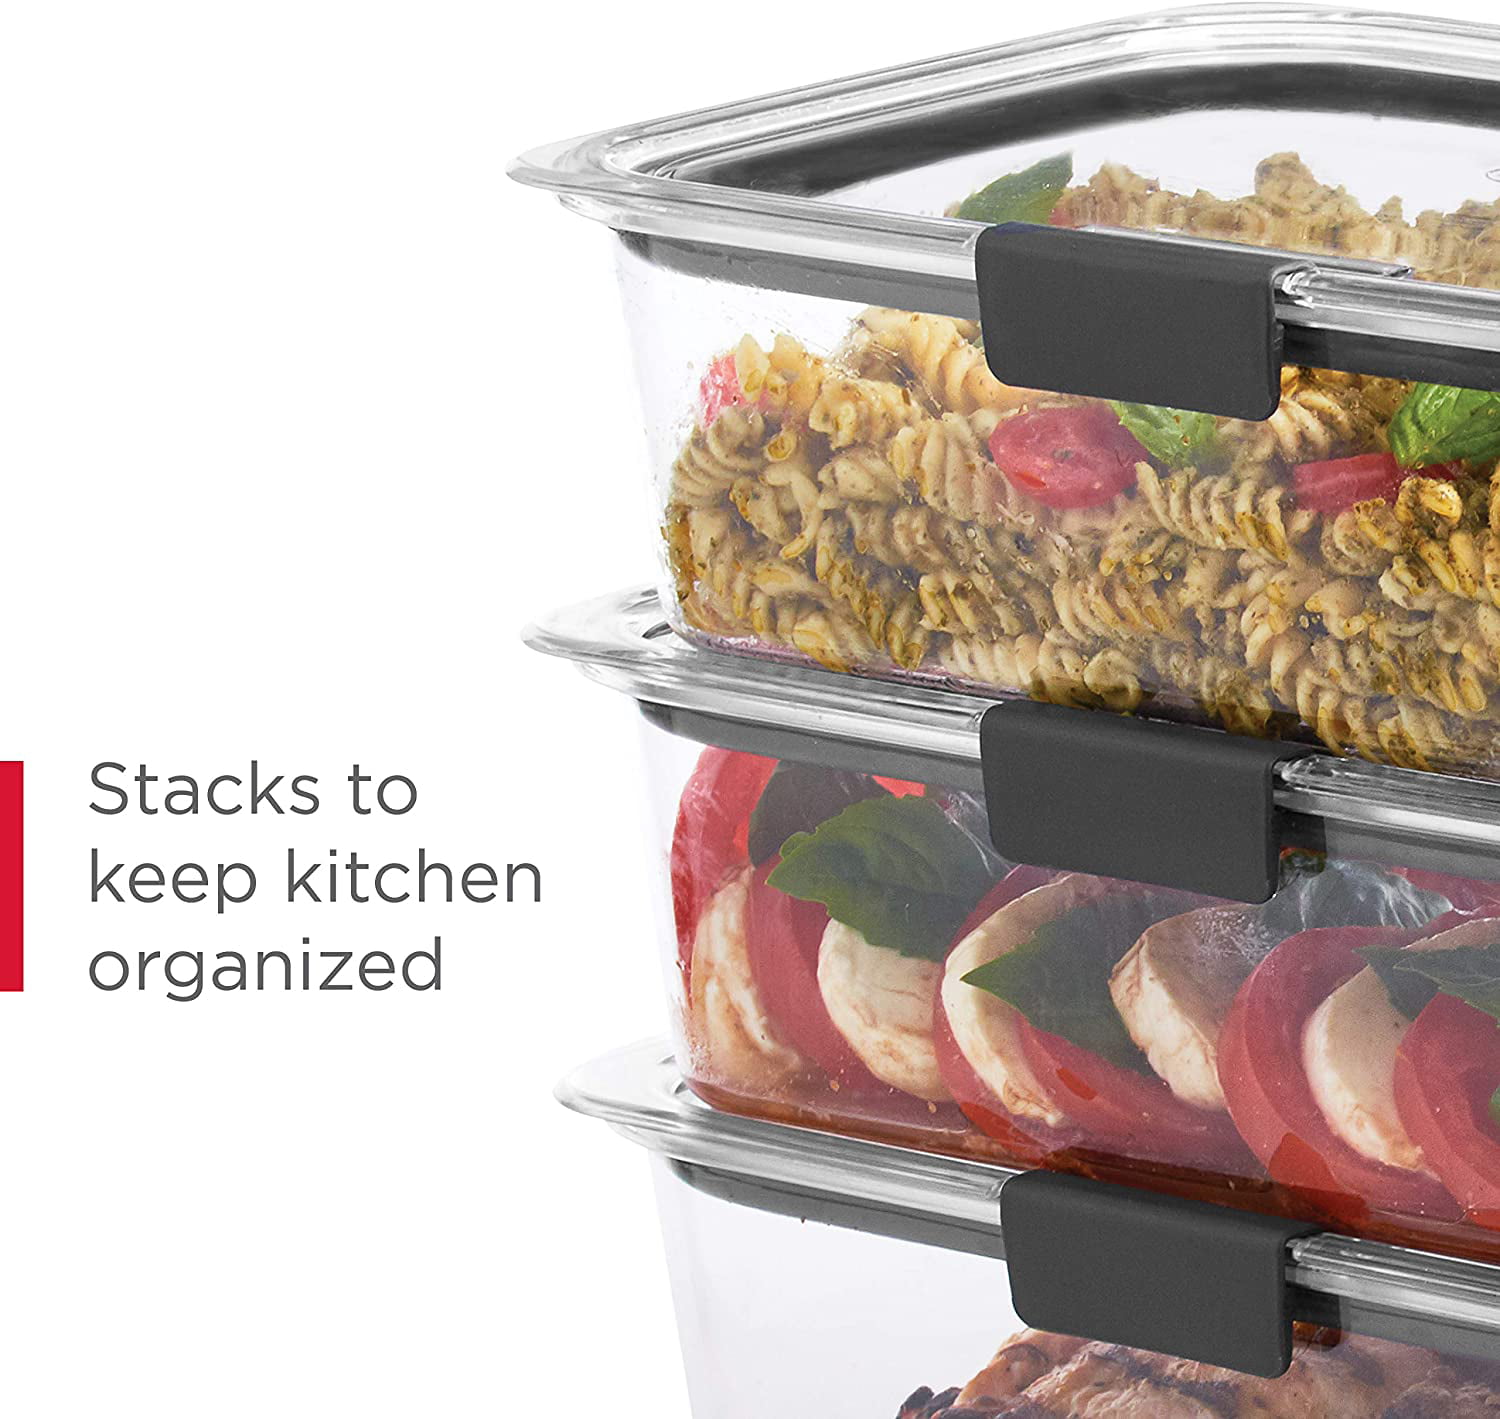 Rubbermaid 14-Piece Brilliance Food Storage Containers with Lids for Lunch,  Meal Prep, and Leftovers, Dishwasher Safe, Clear/Grey – Premium Distributors